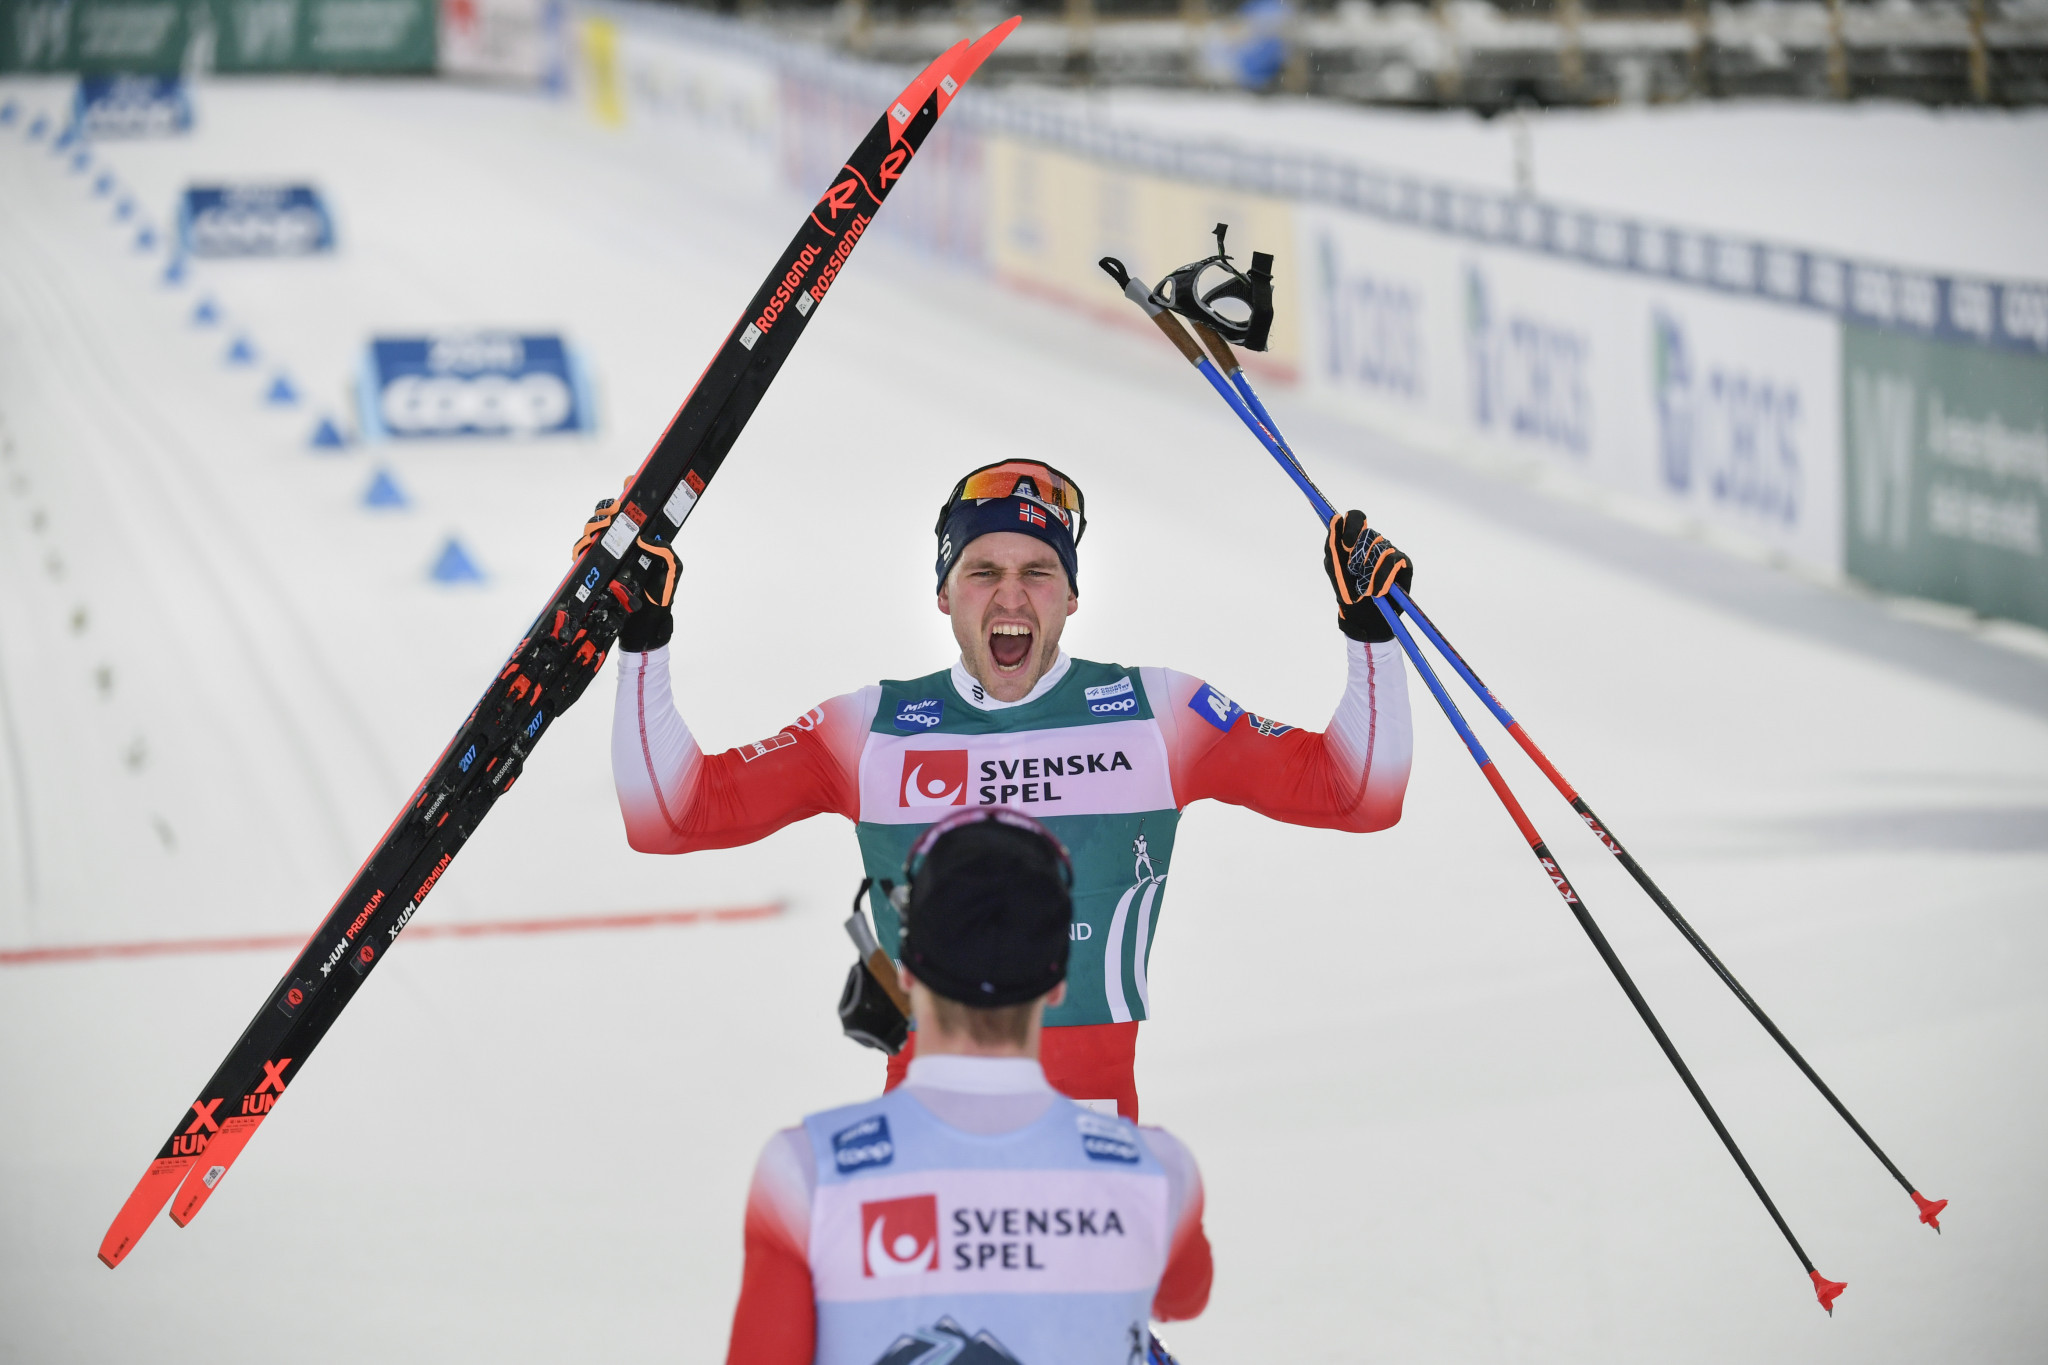 Norway win in individual pursuit at FIS Cross-Country World Cup